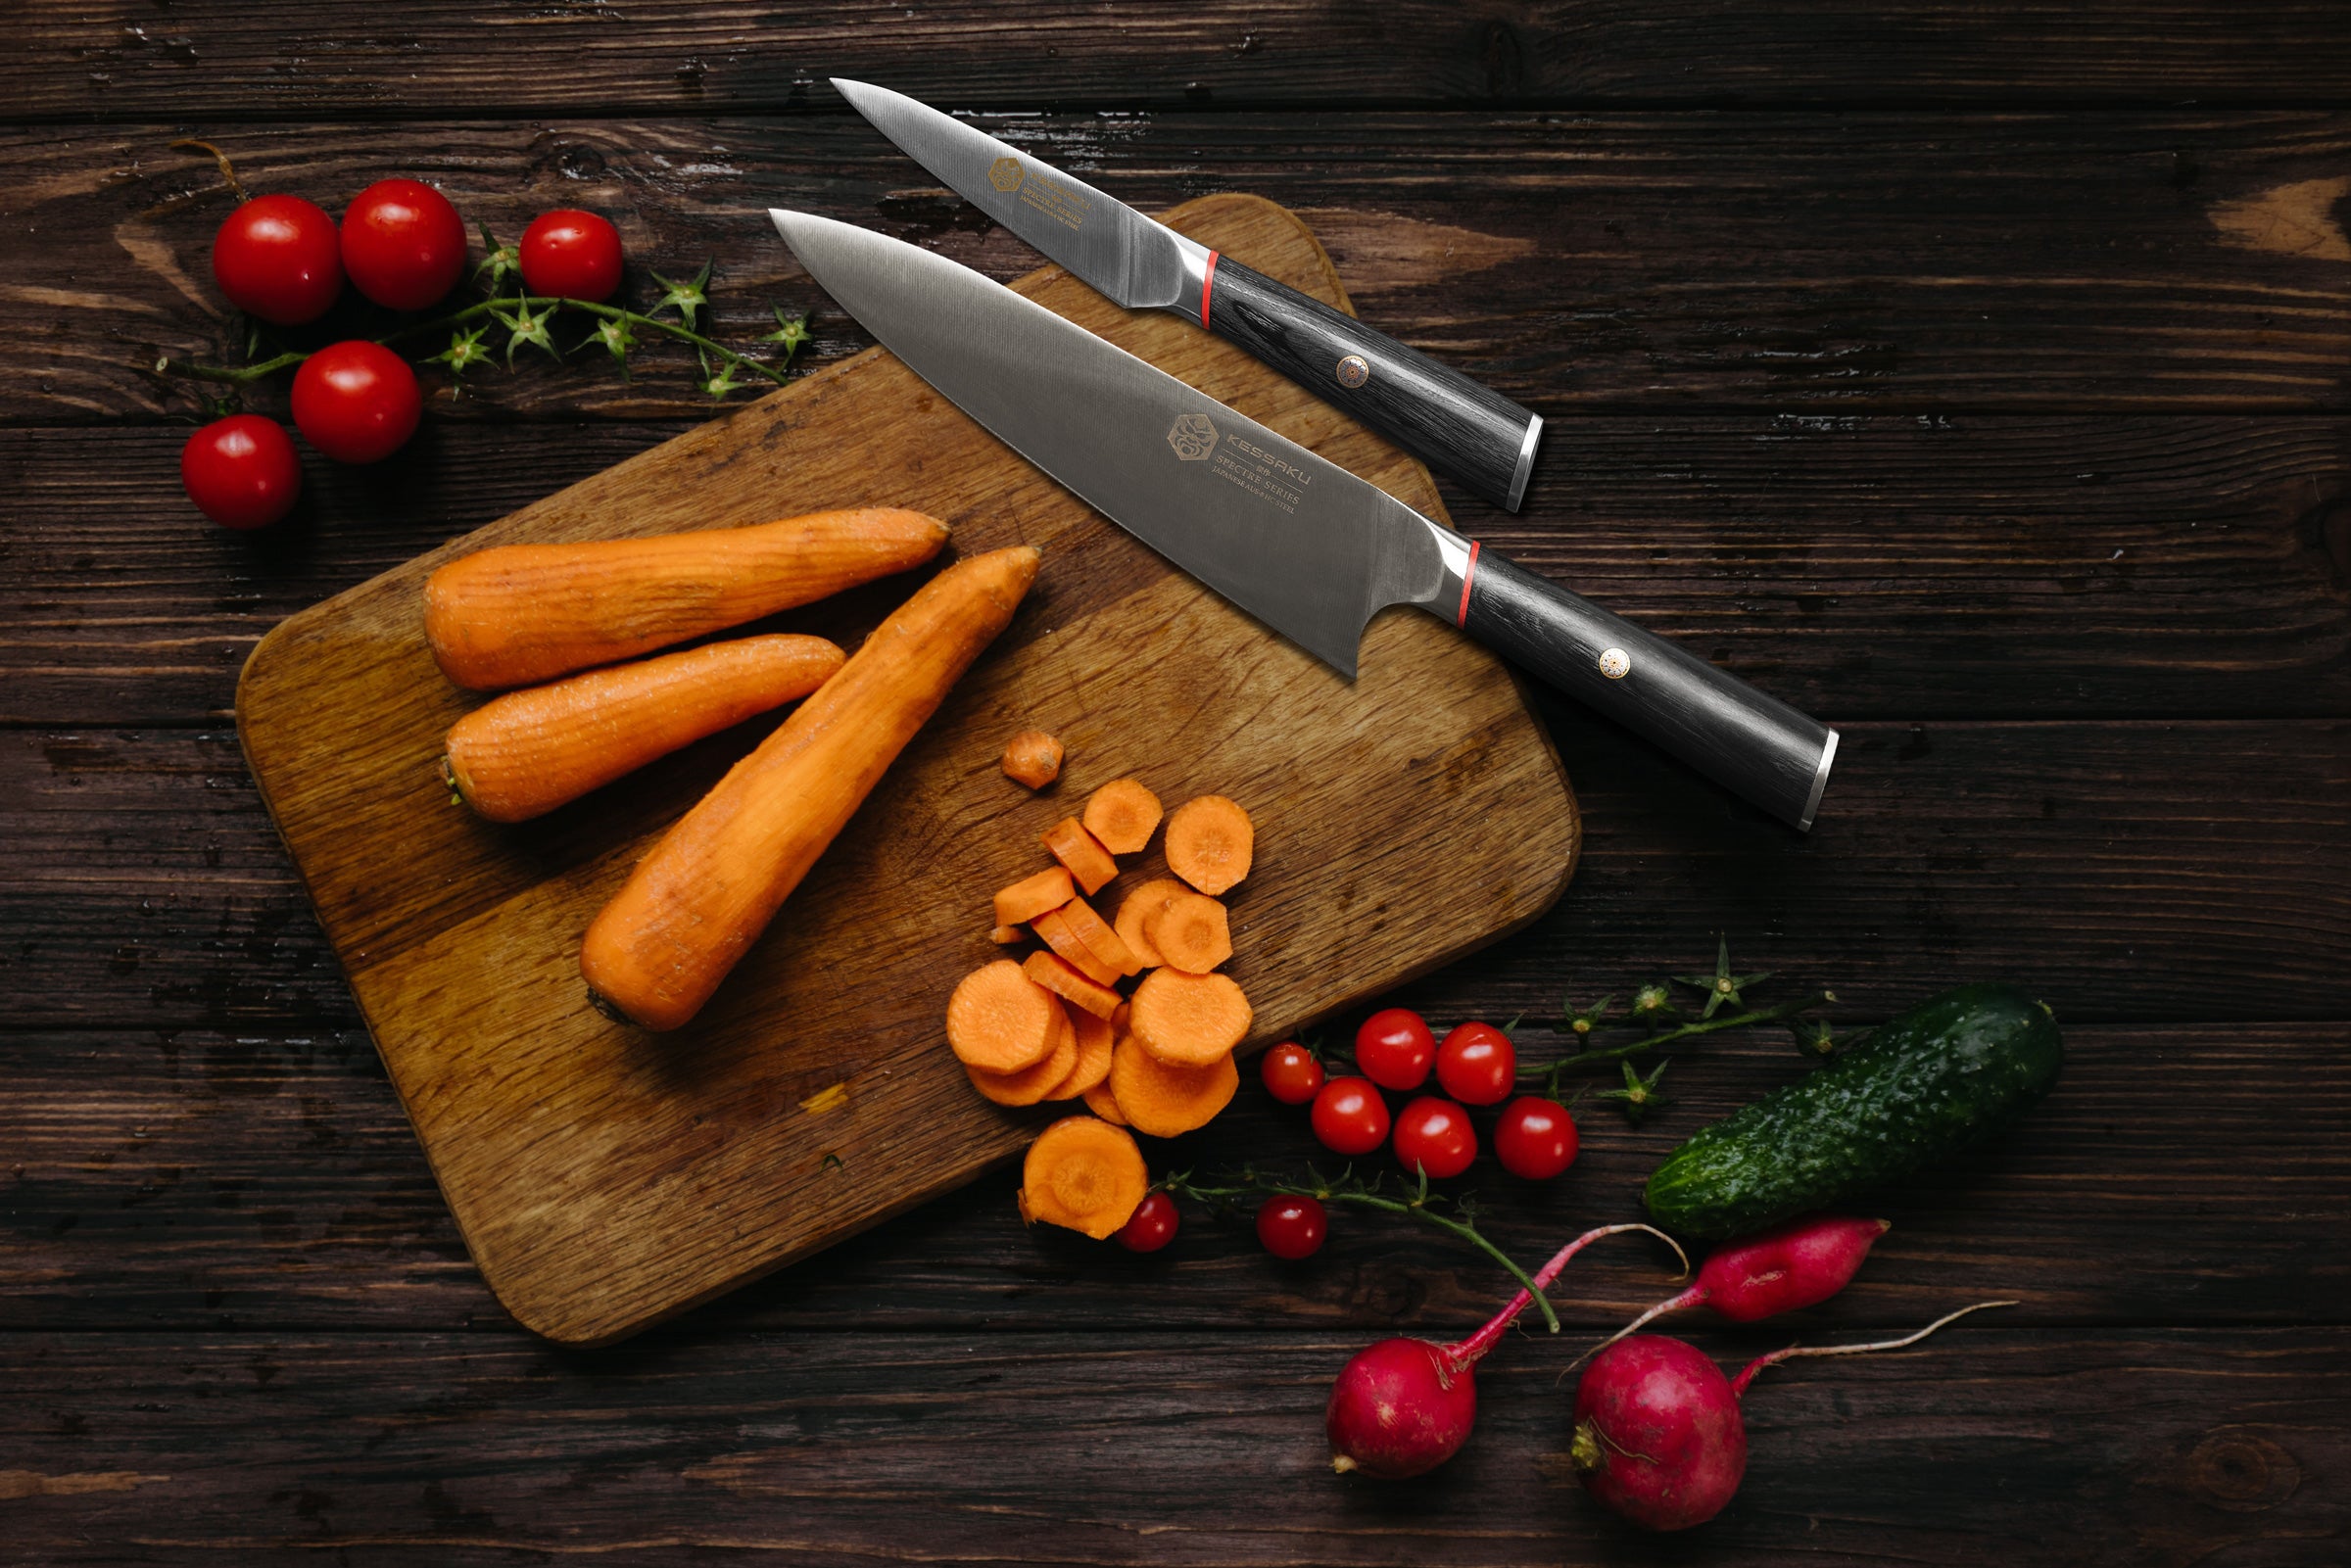 The Spectre Chef's Knife and Paring Knife on a cutting board with peeled and sliced carrots, surround by radishes, and a pickle.